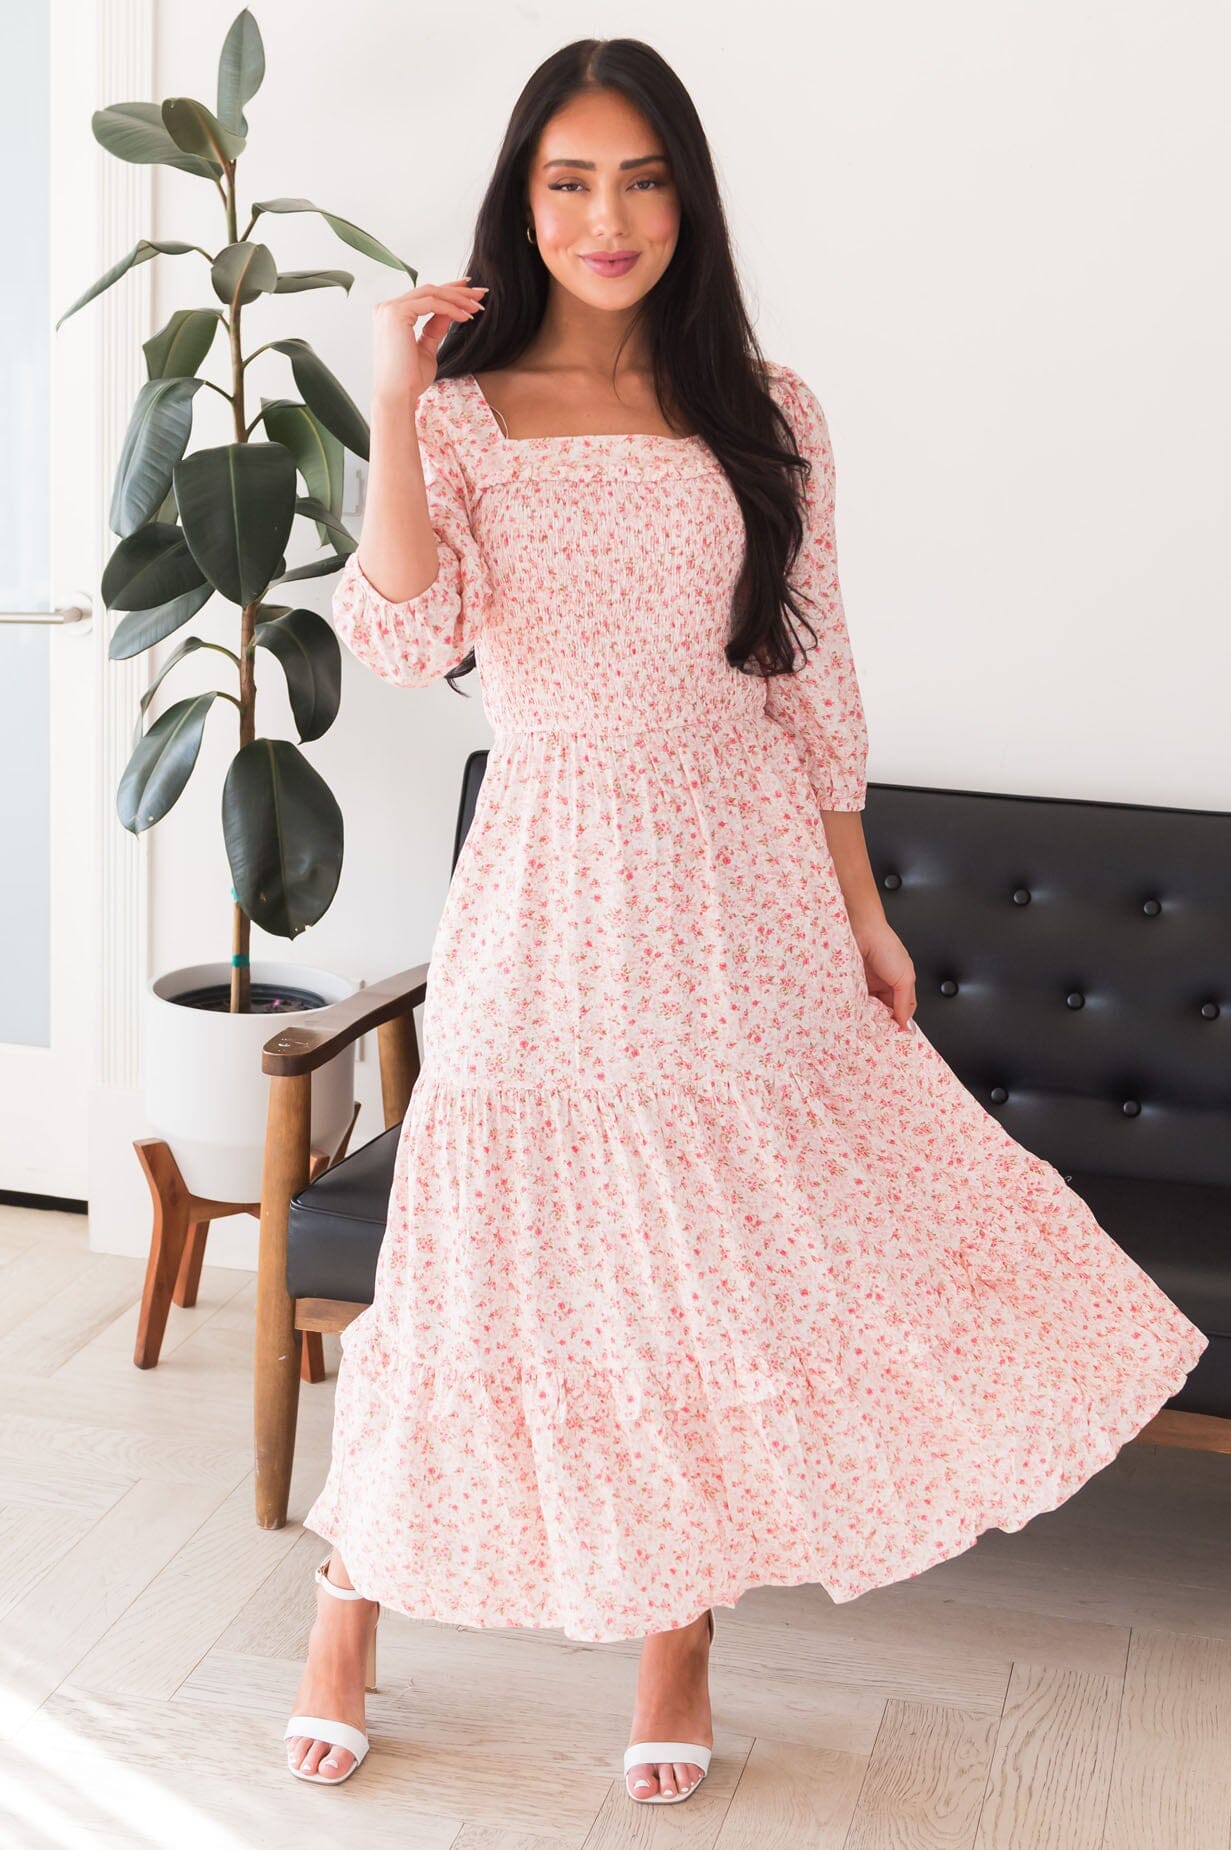 The Rozalyn Modest Floral Dress NeeSee's Dresses